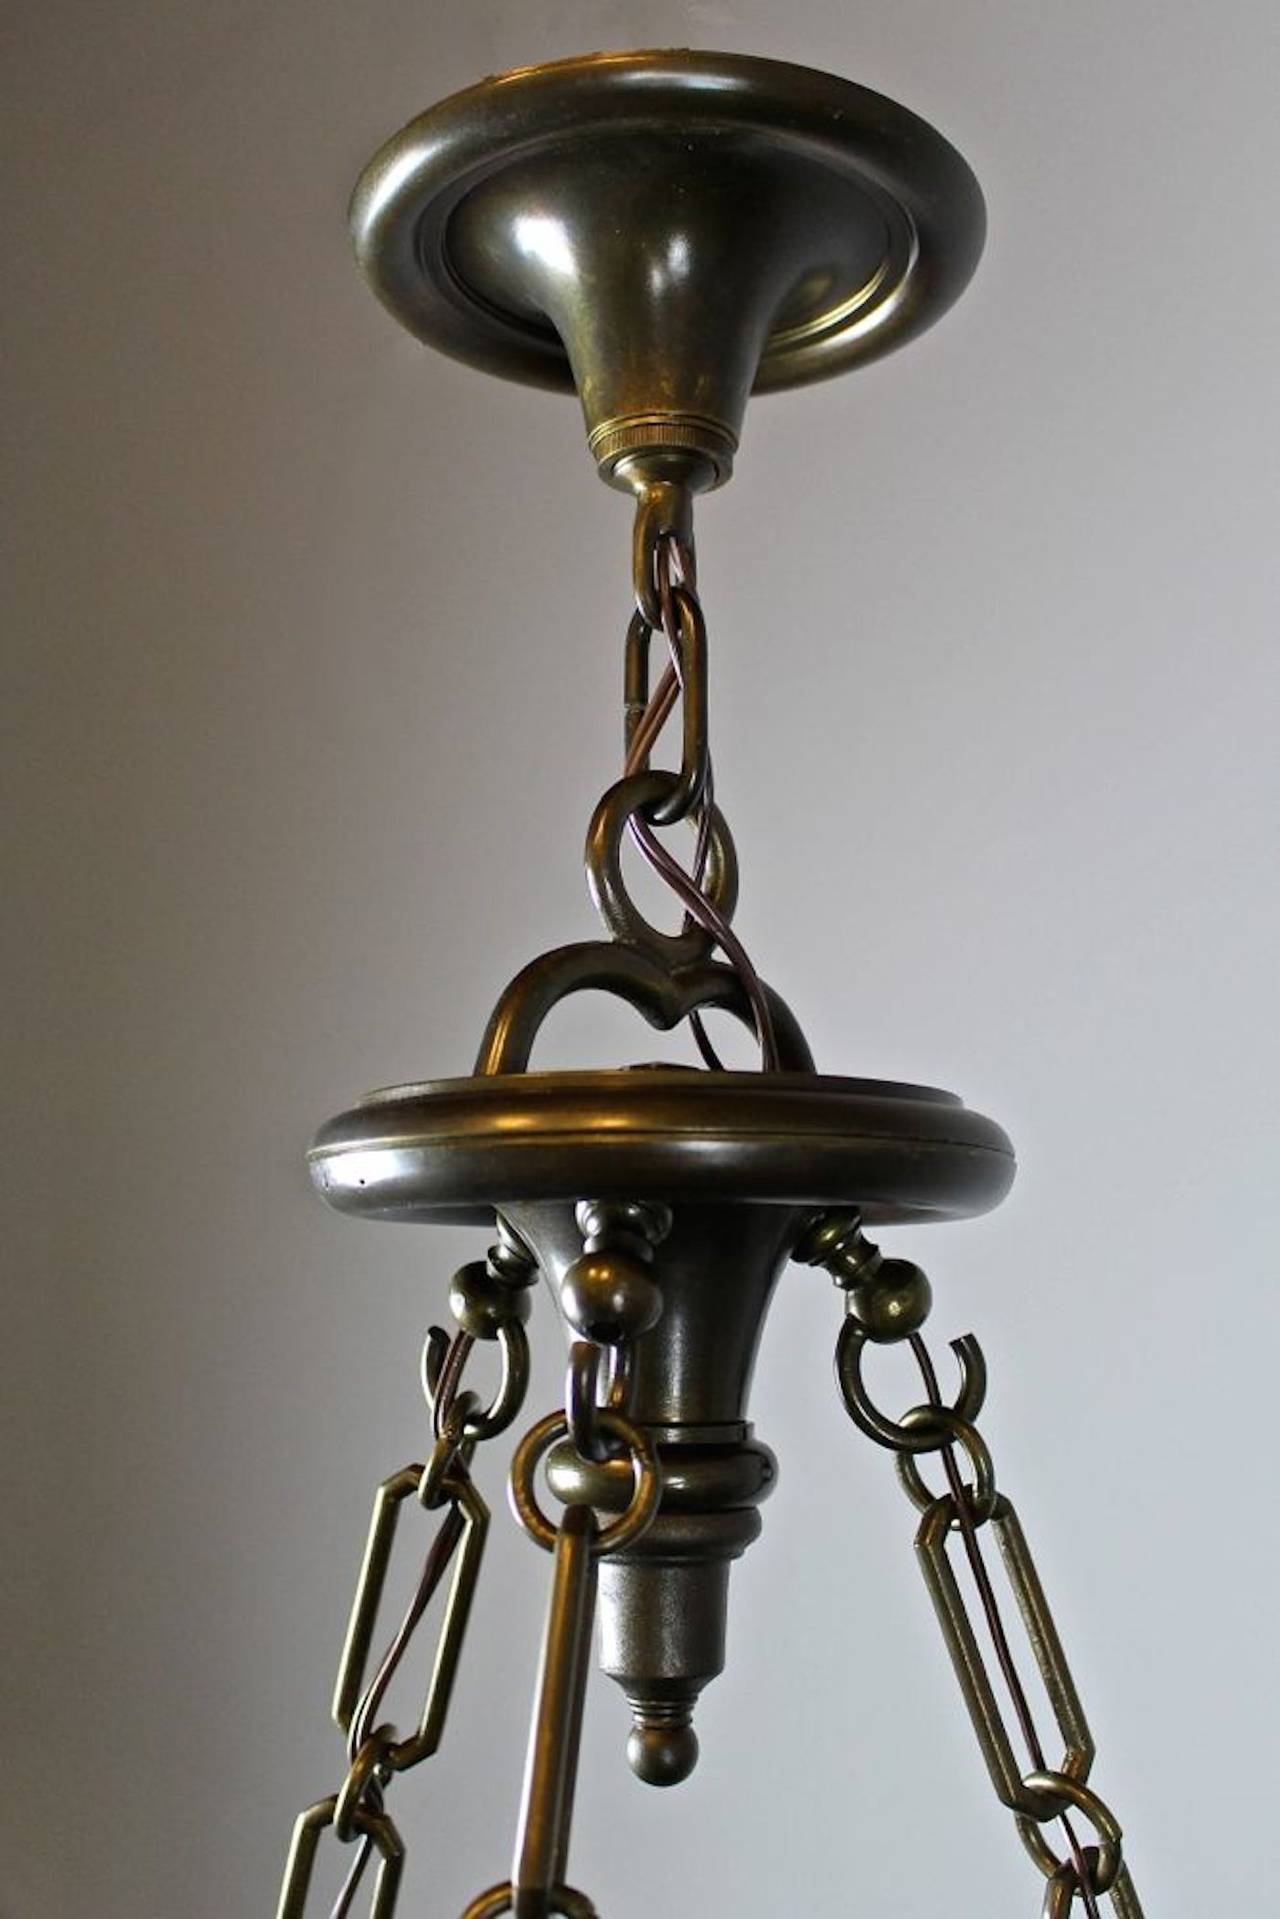 Large Sheffield Style Lighting Fixture with Candle Arms (6-light) In Excellent Condition For Sale In Vancouver, BC